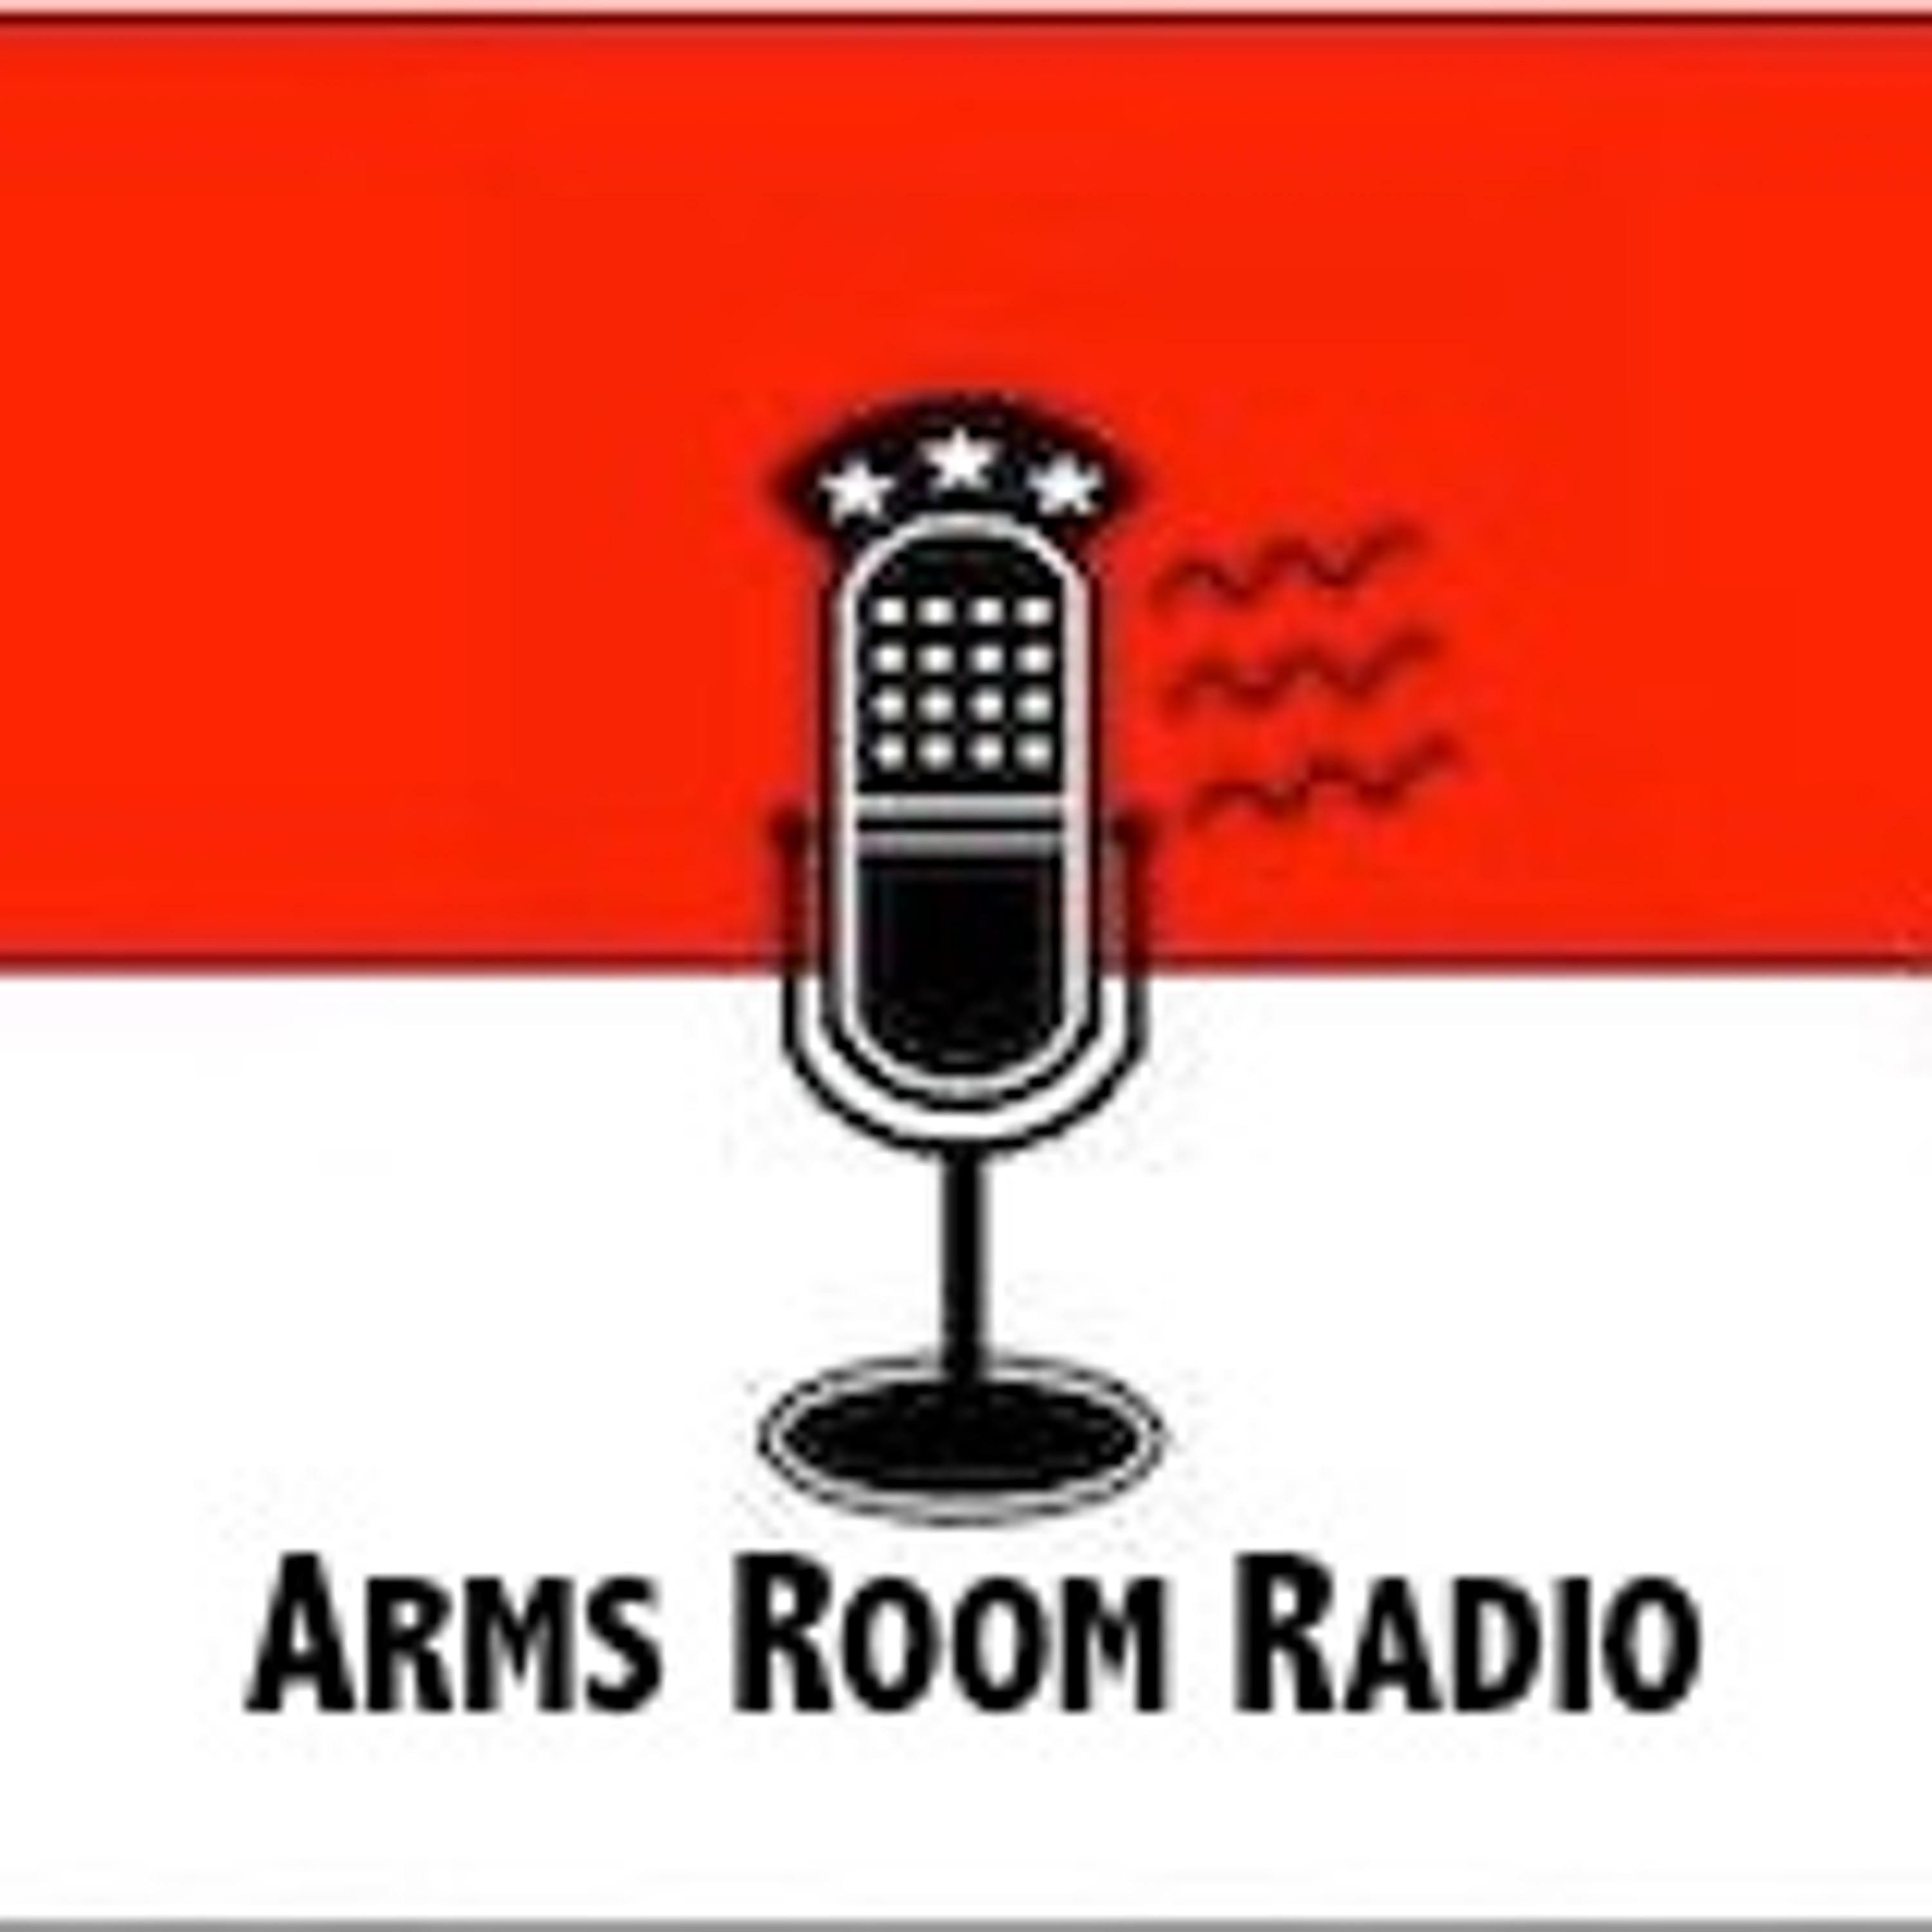 ArmsRoomRadio 04.20.19 Allen West calls in to educate!